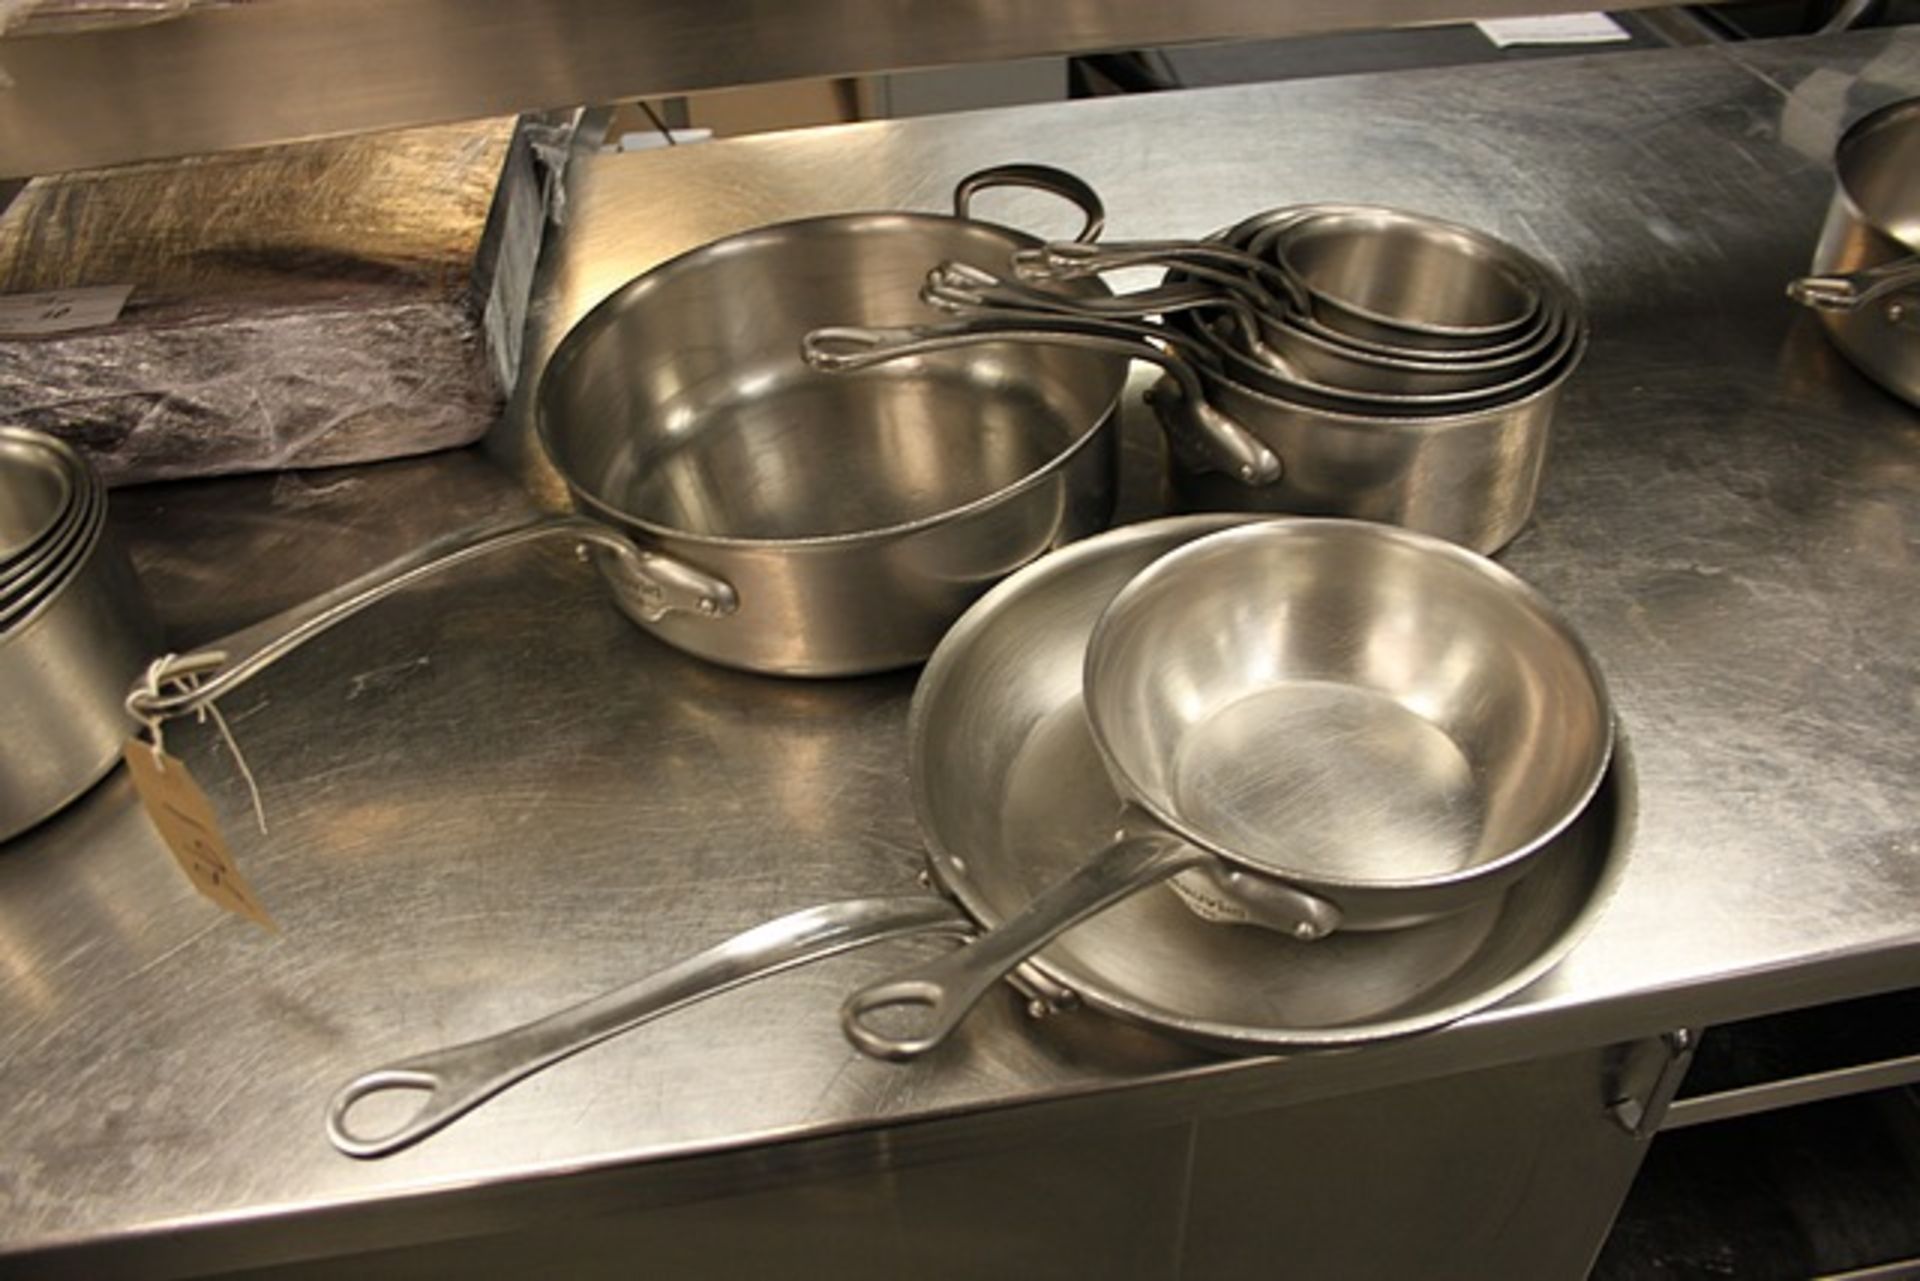 A set of 8 x various Mauviel stainless steel pans